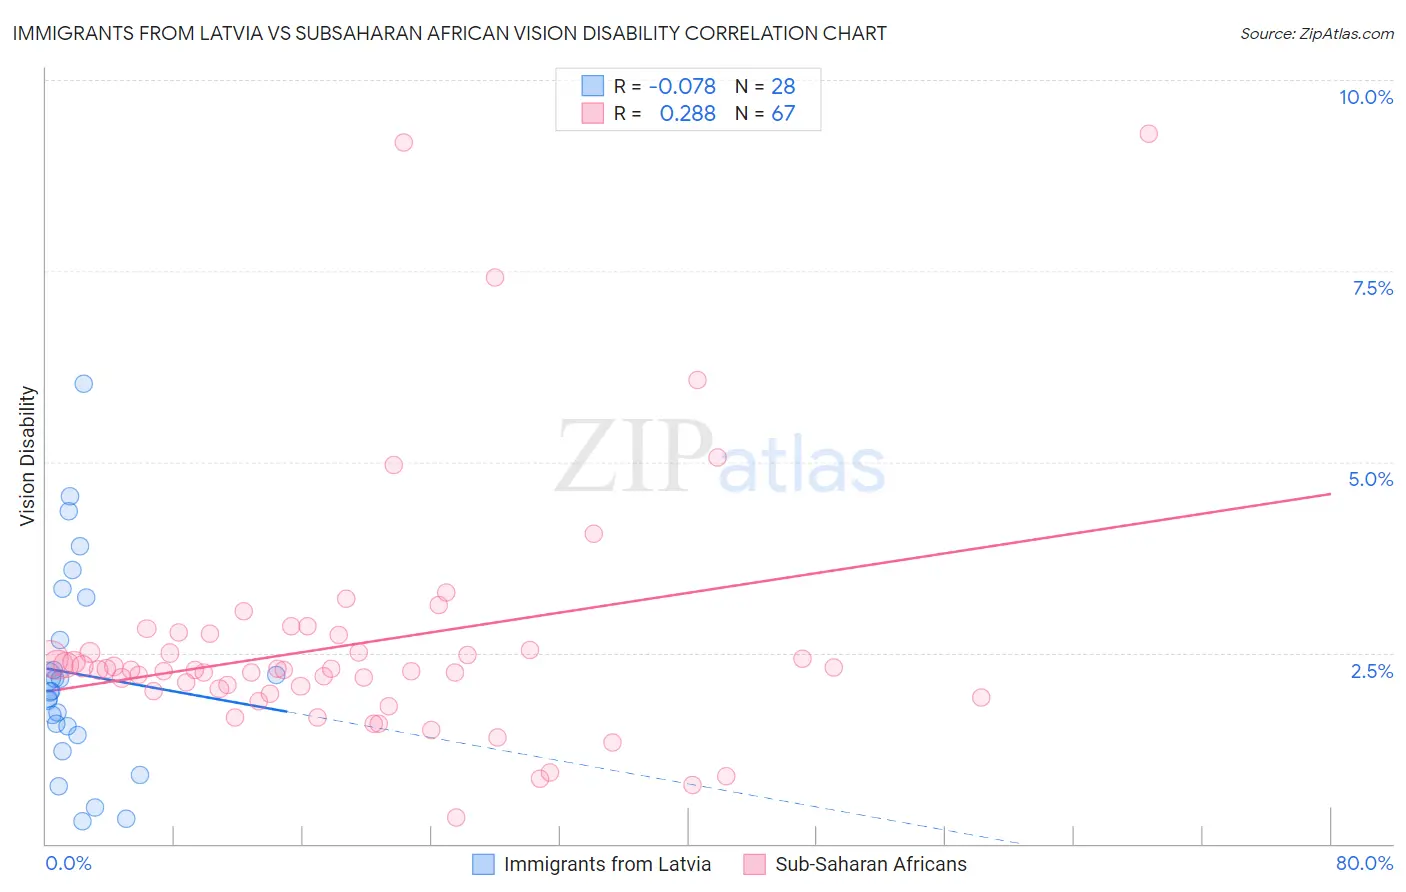 Immigrants from Latvia vs Subsaharan African Vision Disability